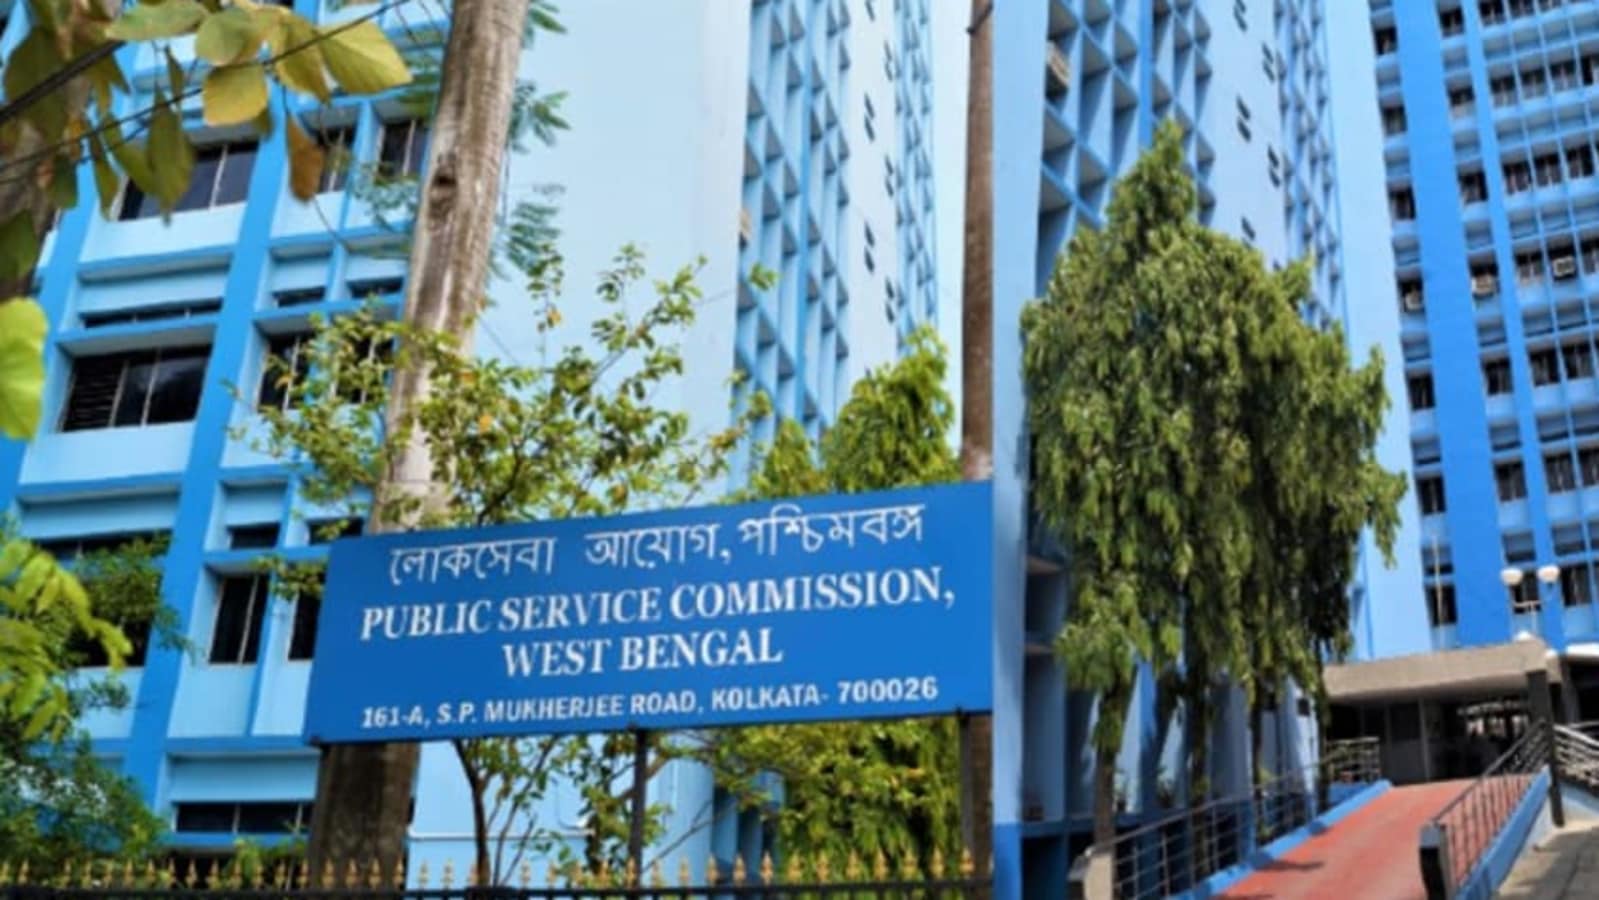 44 qualify for West Bengal Judicial Service exam interview, WBPSC releases list